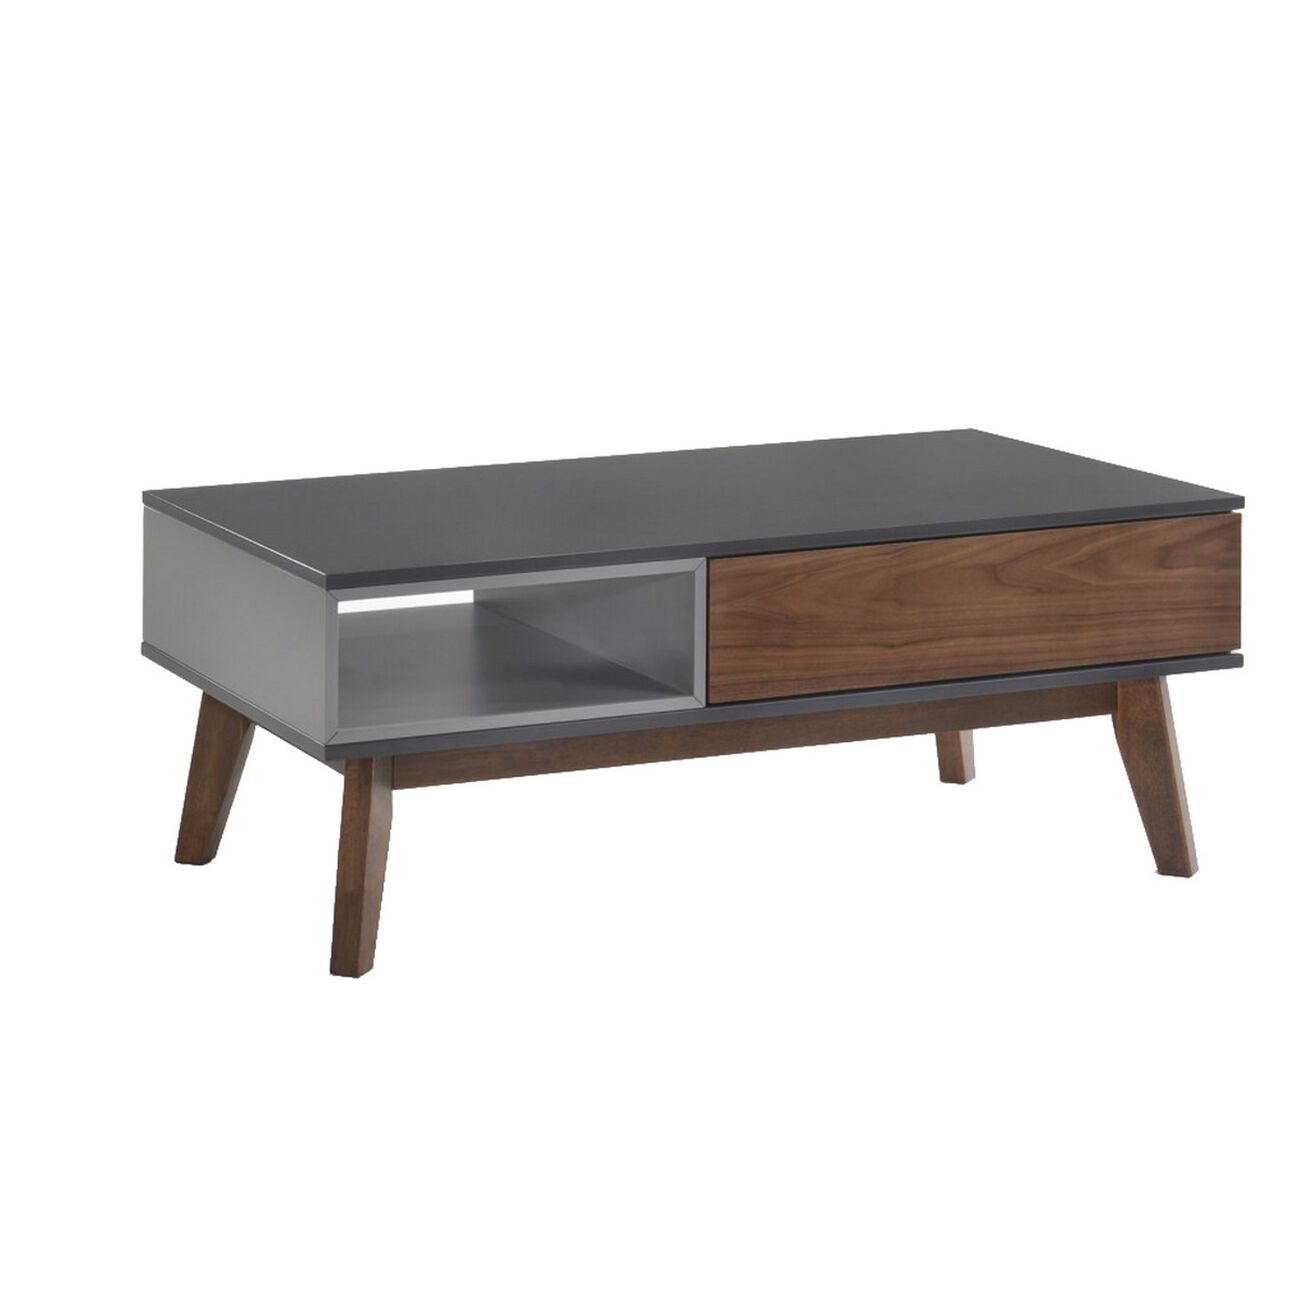 1 Drawer Wooden Coffee Table with Open Compartment, Brown and Gray